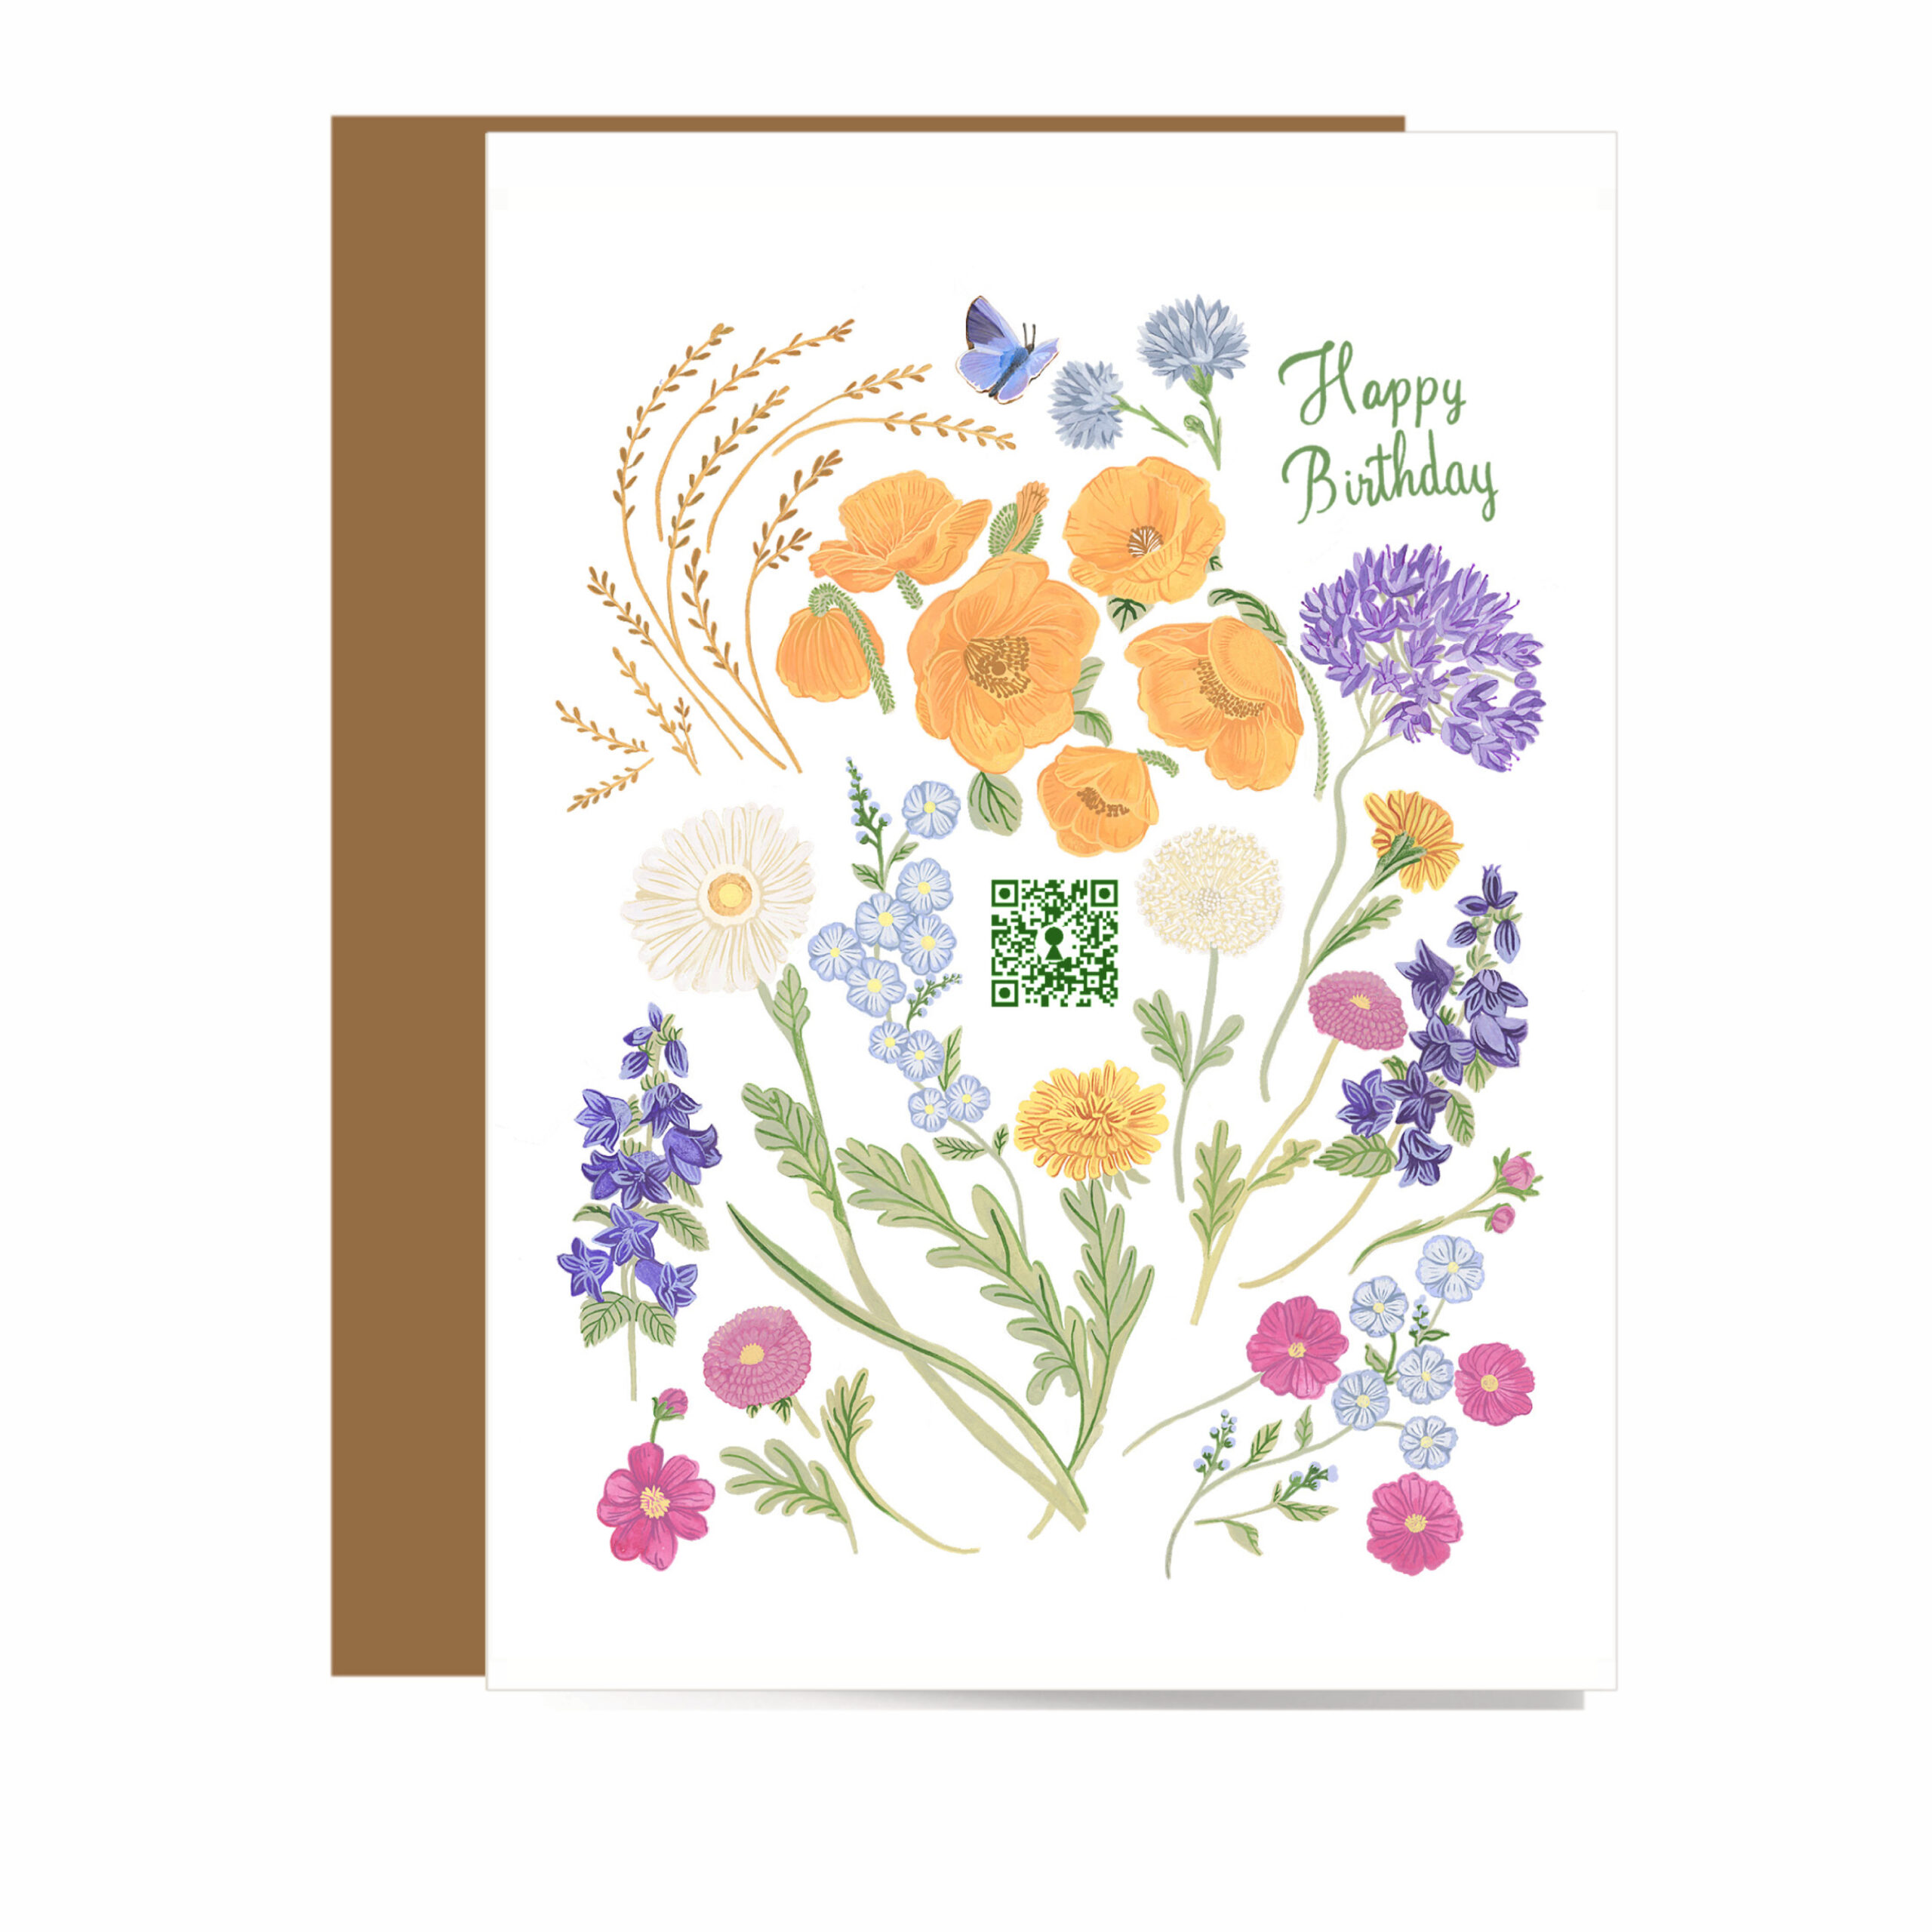 birthday card with watercolor of flowers and green QR code on front that sings handcrafted birthday song